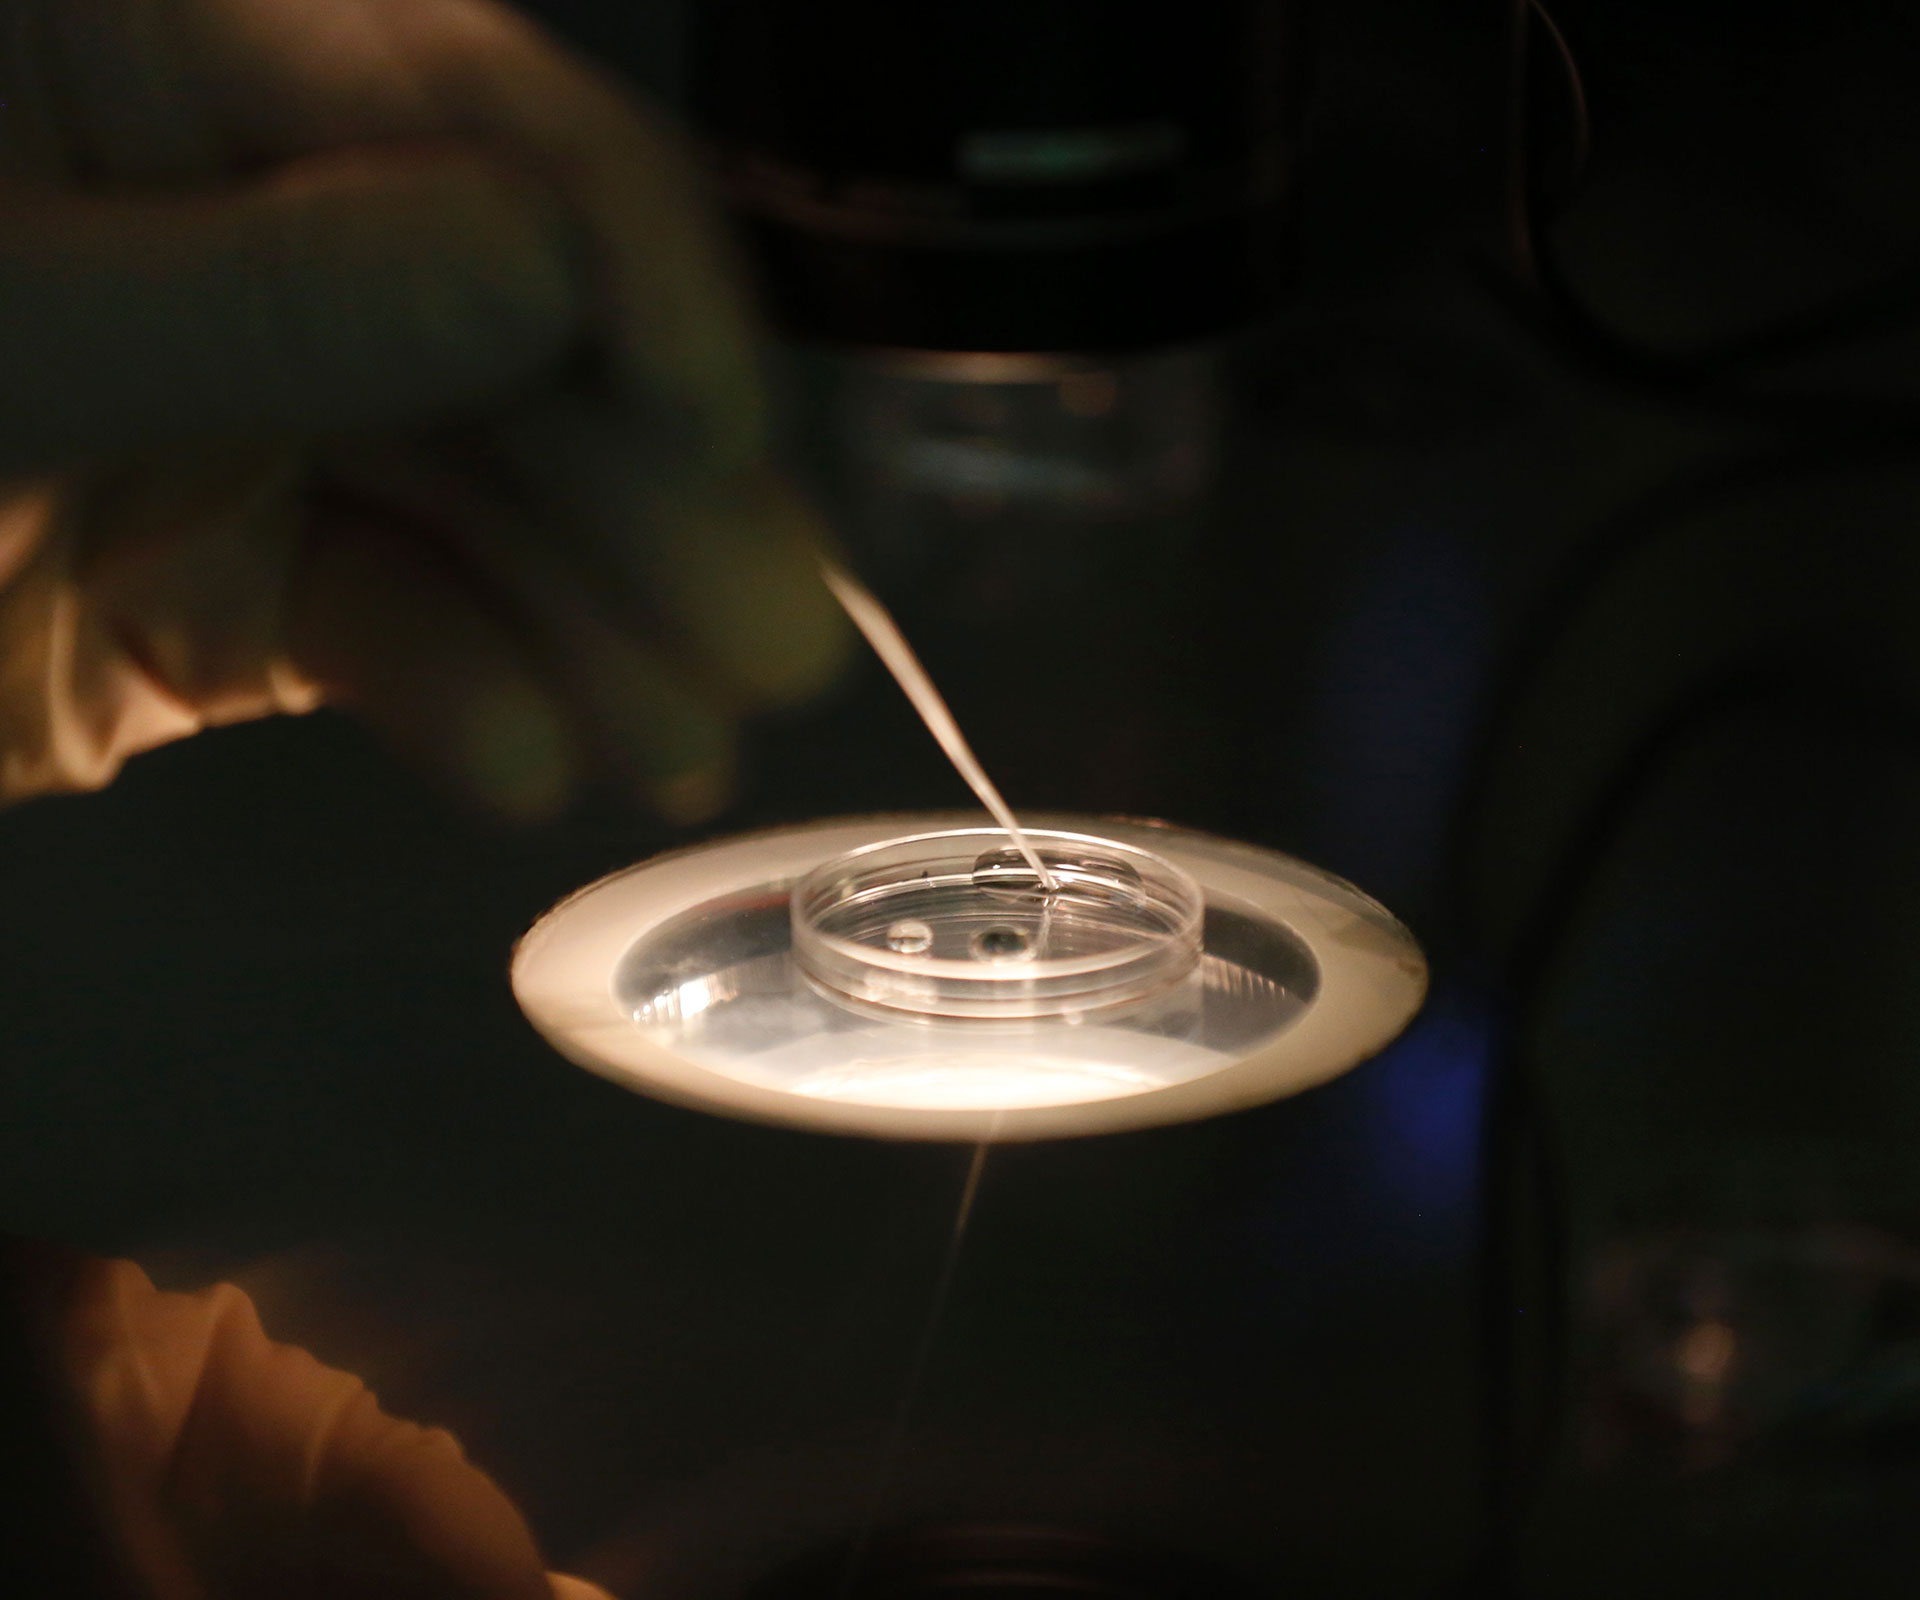 Fertility clinic embryos destroyed during SA storm